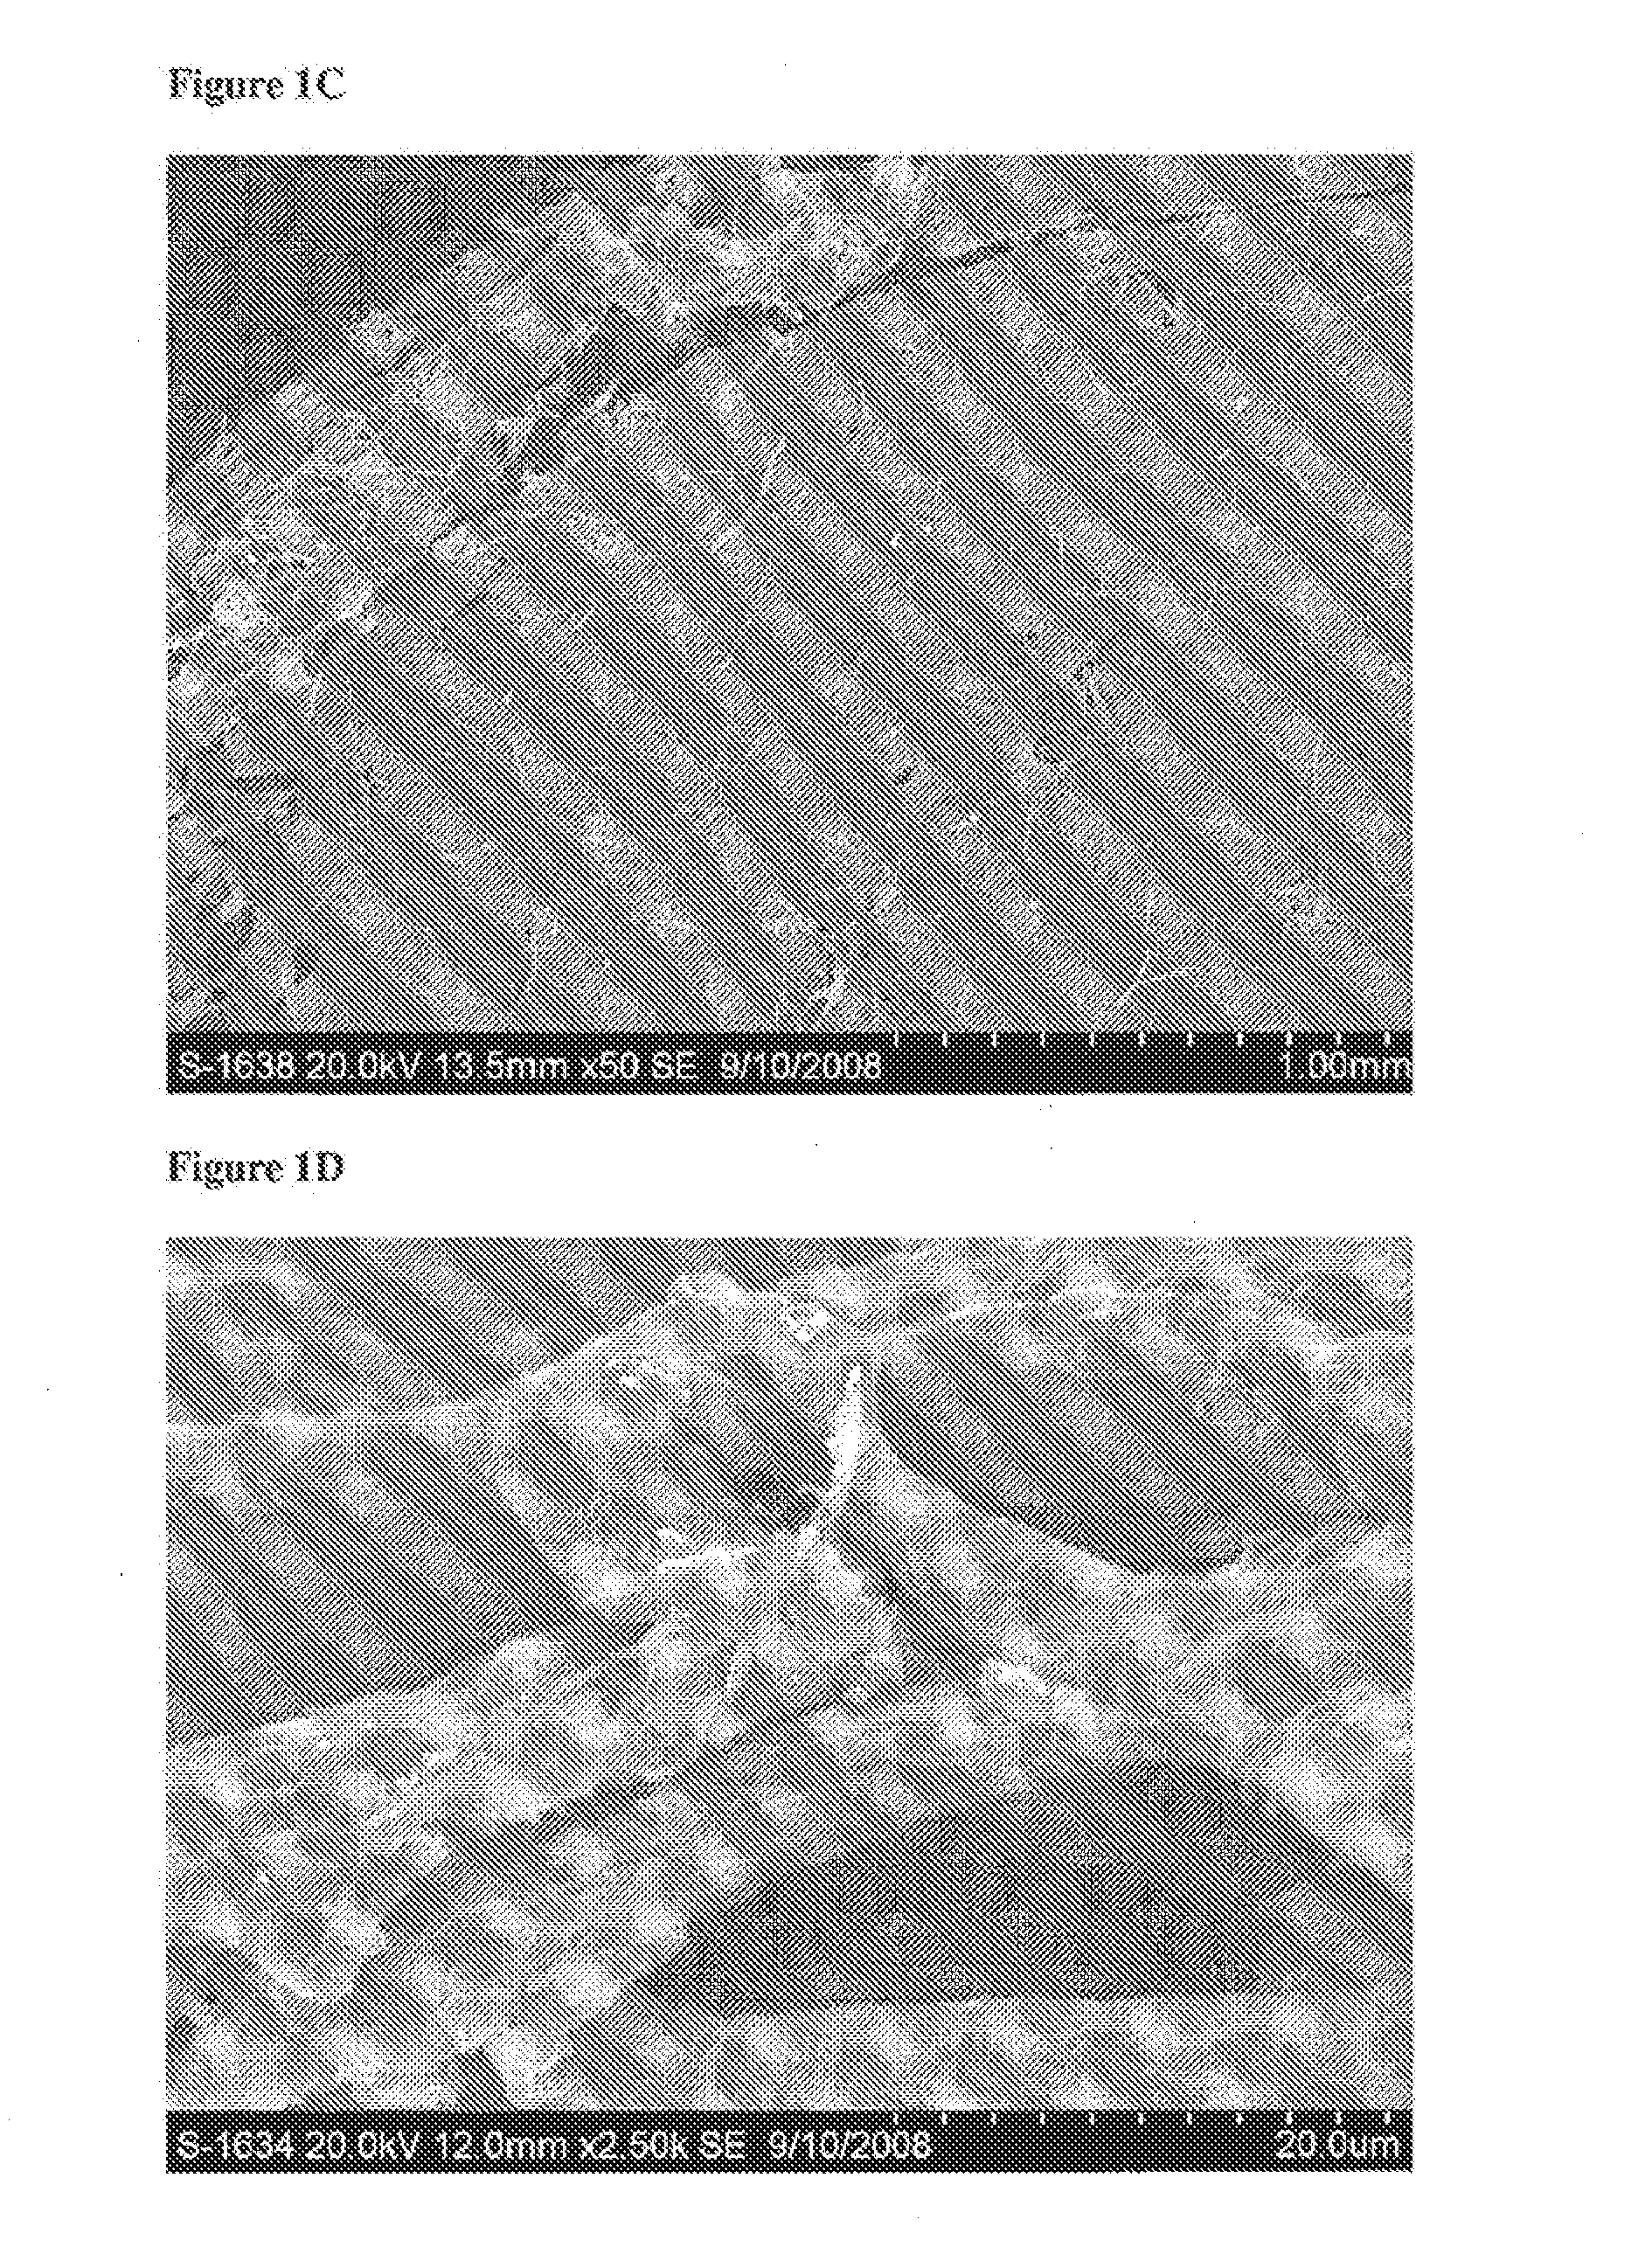 Platelet-derived growth factor compositions and methods for the treatment of osteochondral defects